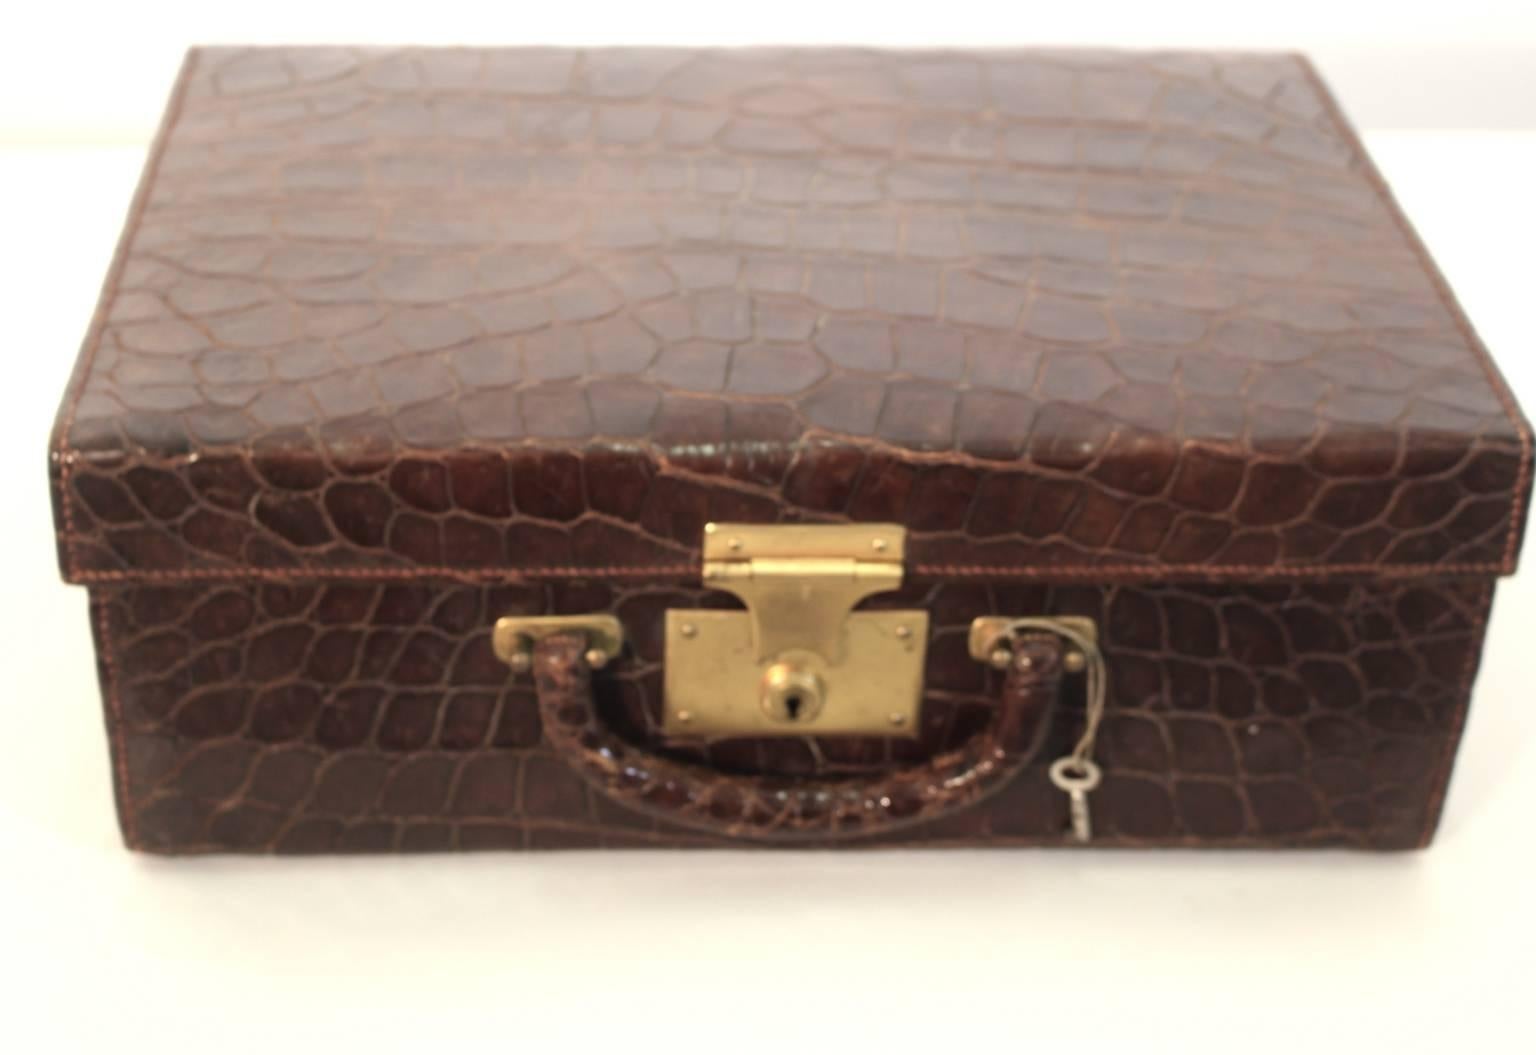 Art Deco alligator traveling grooming leather case is lined with red leather and features various compartments replete with glass bottles with gold lids, leather boxes, flacons and a mirror.
The leather case is lockable with the original key.

The